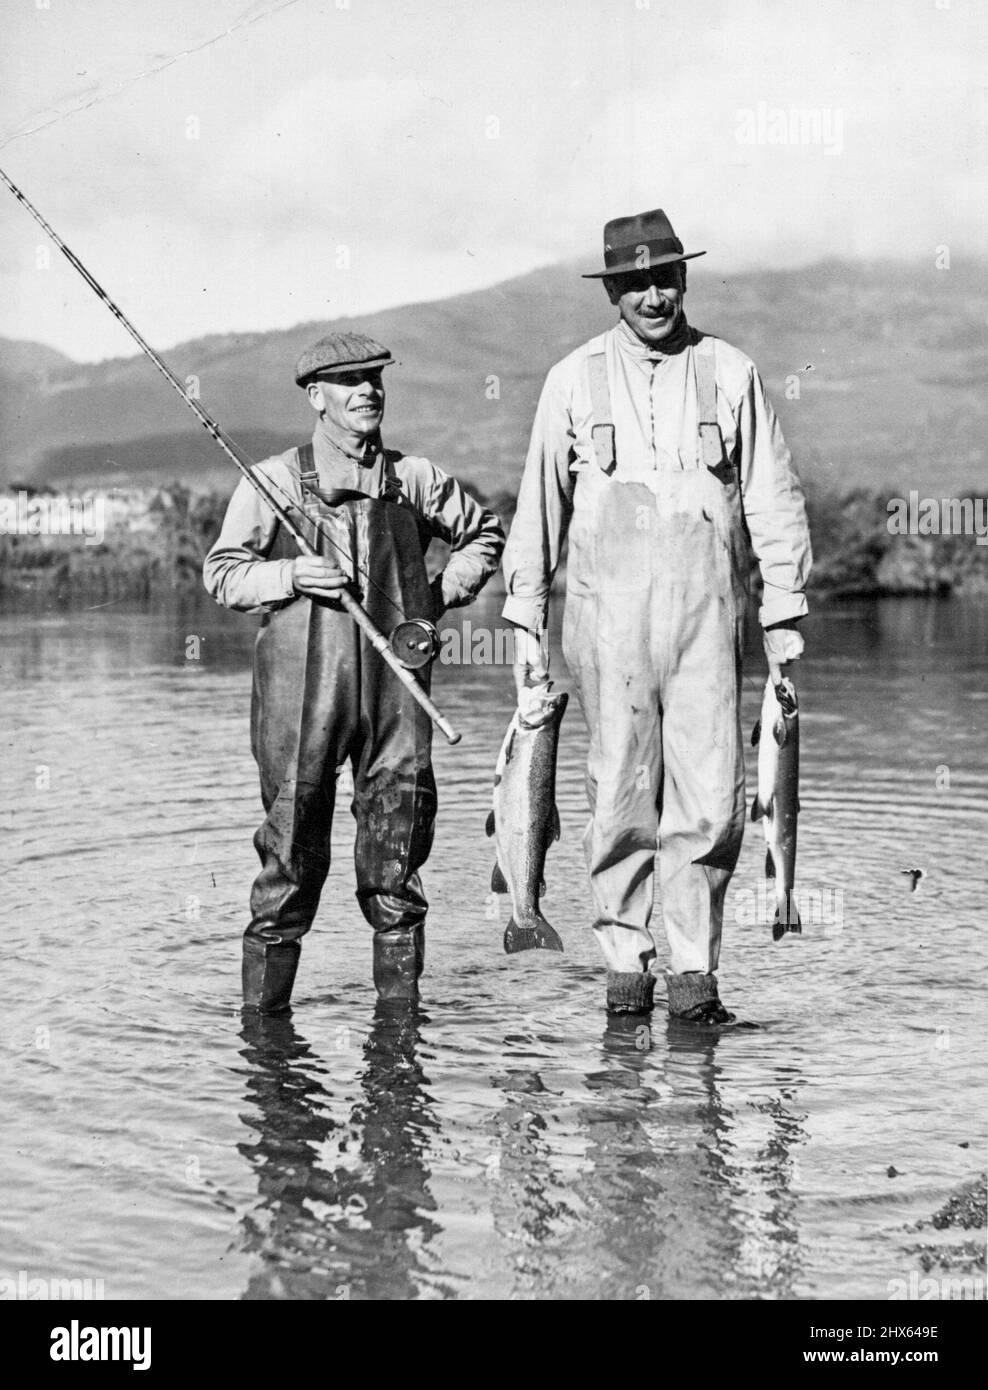 New Zealand's trout fishing second to none. The Governor - General of New Zealand, Viscount Galway, with his gillie a at Tongariro river pool , in the Lake Taupo district. July 04, 1938. Stock Photo